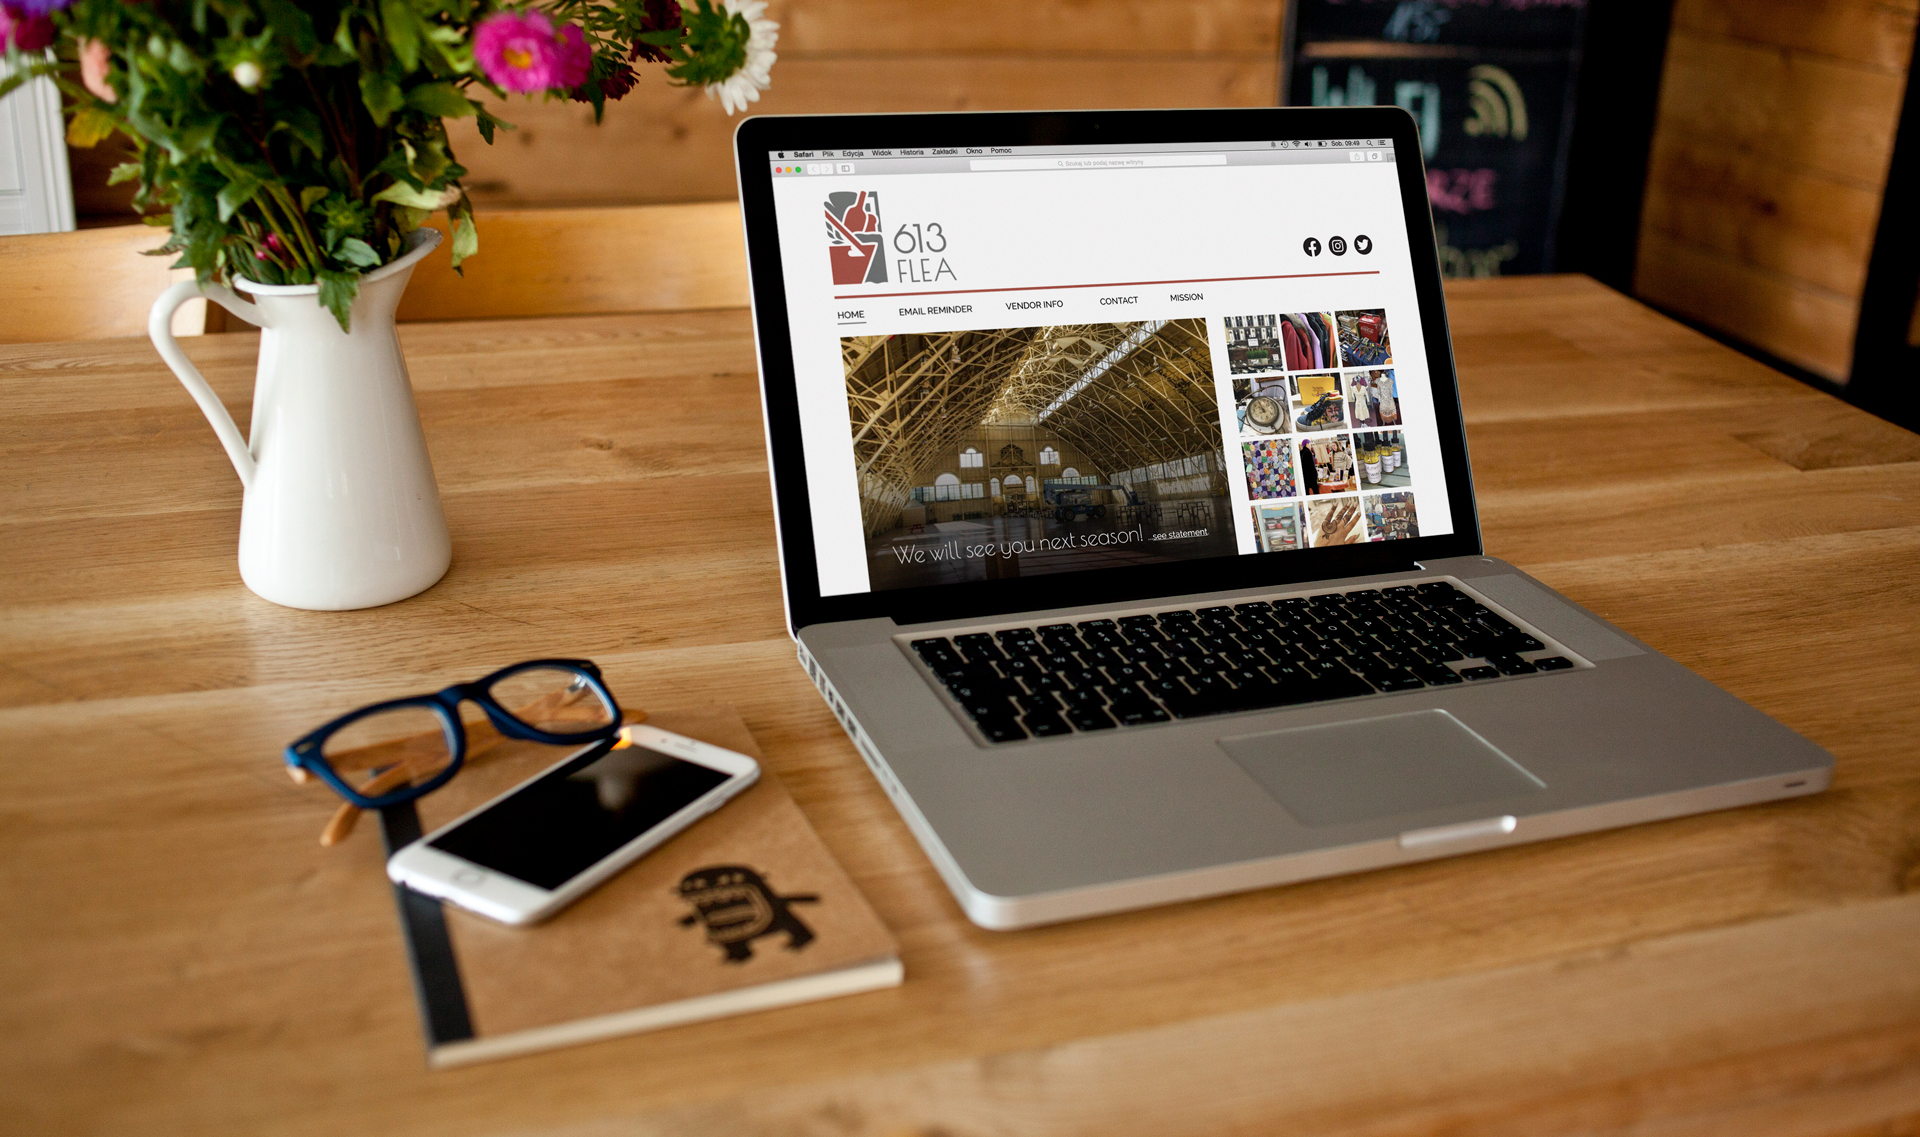 A laptop displays a mockup of the 613 Flea website homepage, on a wood surface with a white of pink flowers, a notepad, pair of glasses and smartphone.